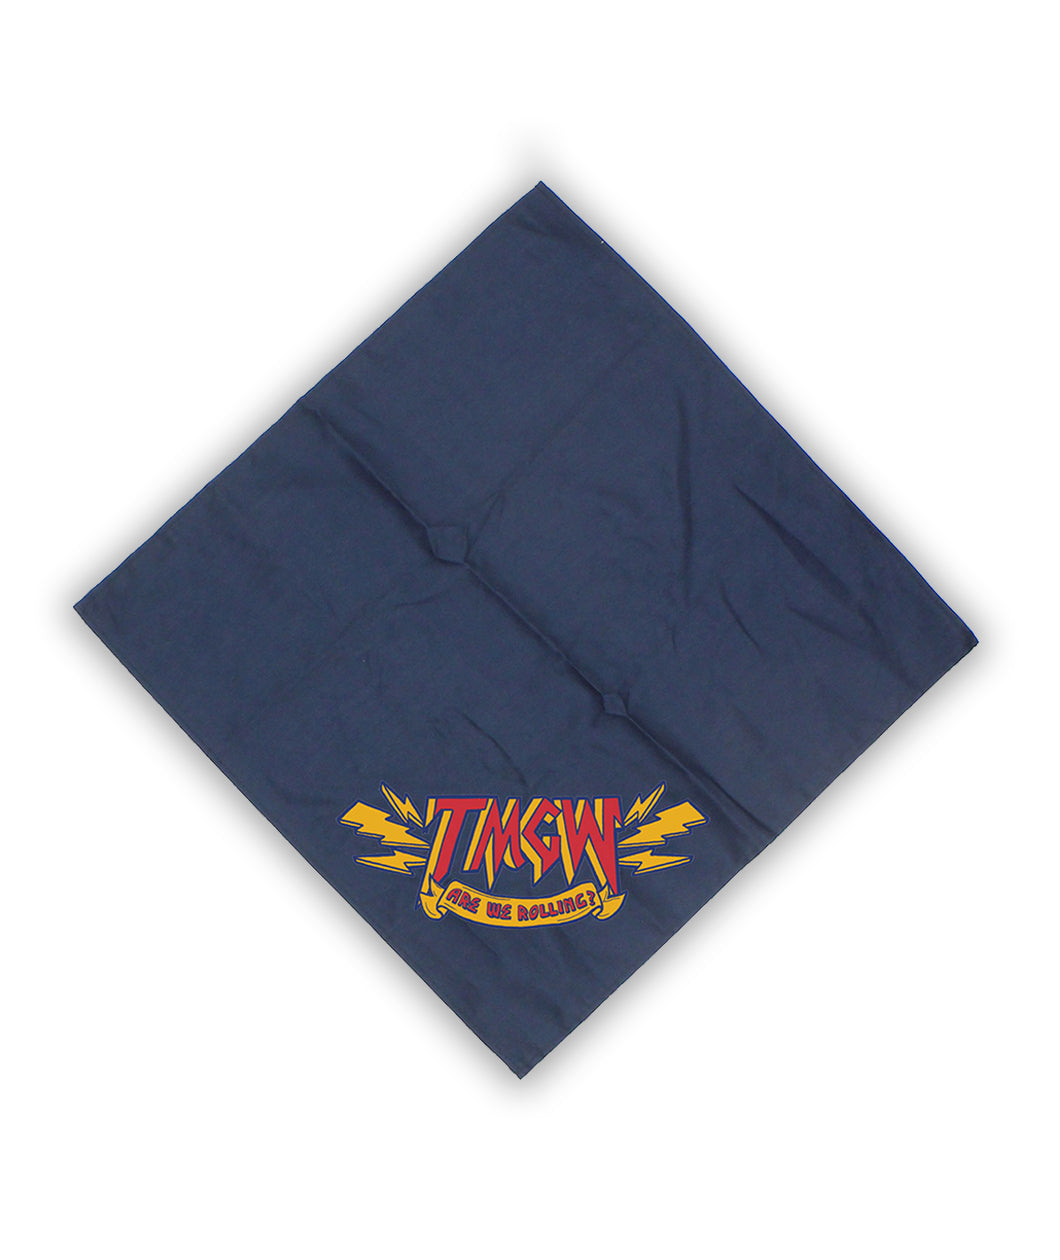 A square, dark blue bandana. In one corner of the bandana is the red text “TMGW” in a yellow outline. Yellow lightning bolts surround the T and W. Below that text is a yellow banner with “Are we rolling?” in red.